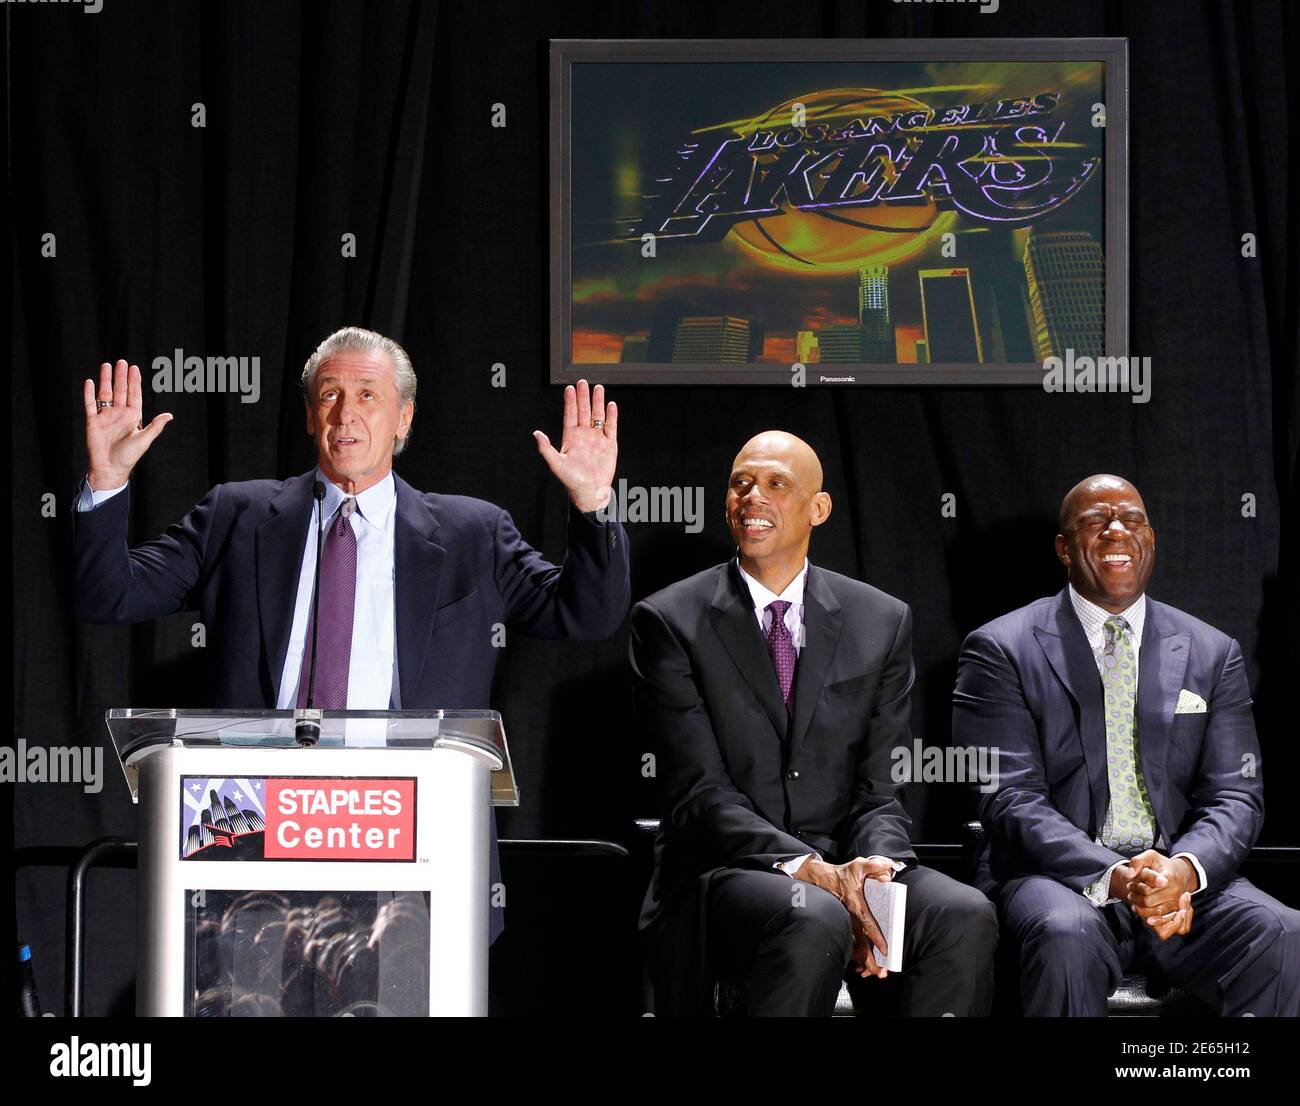 Former Los Angeles Lakers head coach Pat Riley (L) speaks during a ceremony  to unveil a bronze statue of former Lakers basketball player and NBA Hall  of Famer Kareem Abdul-Jabbar (C), as